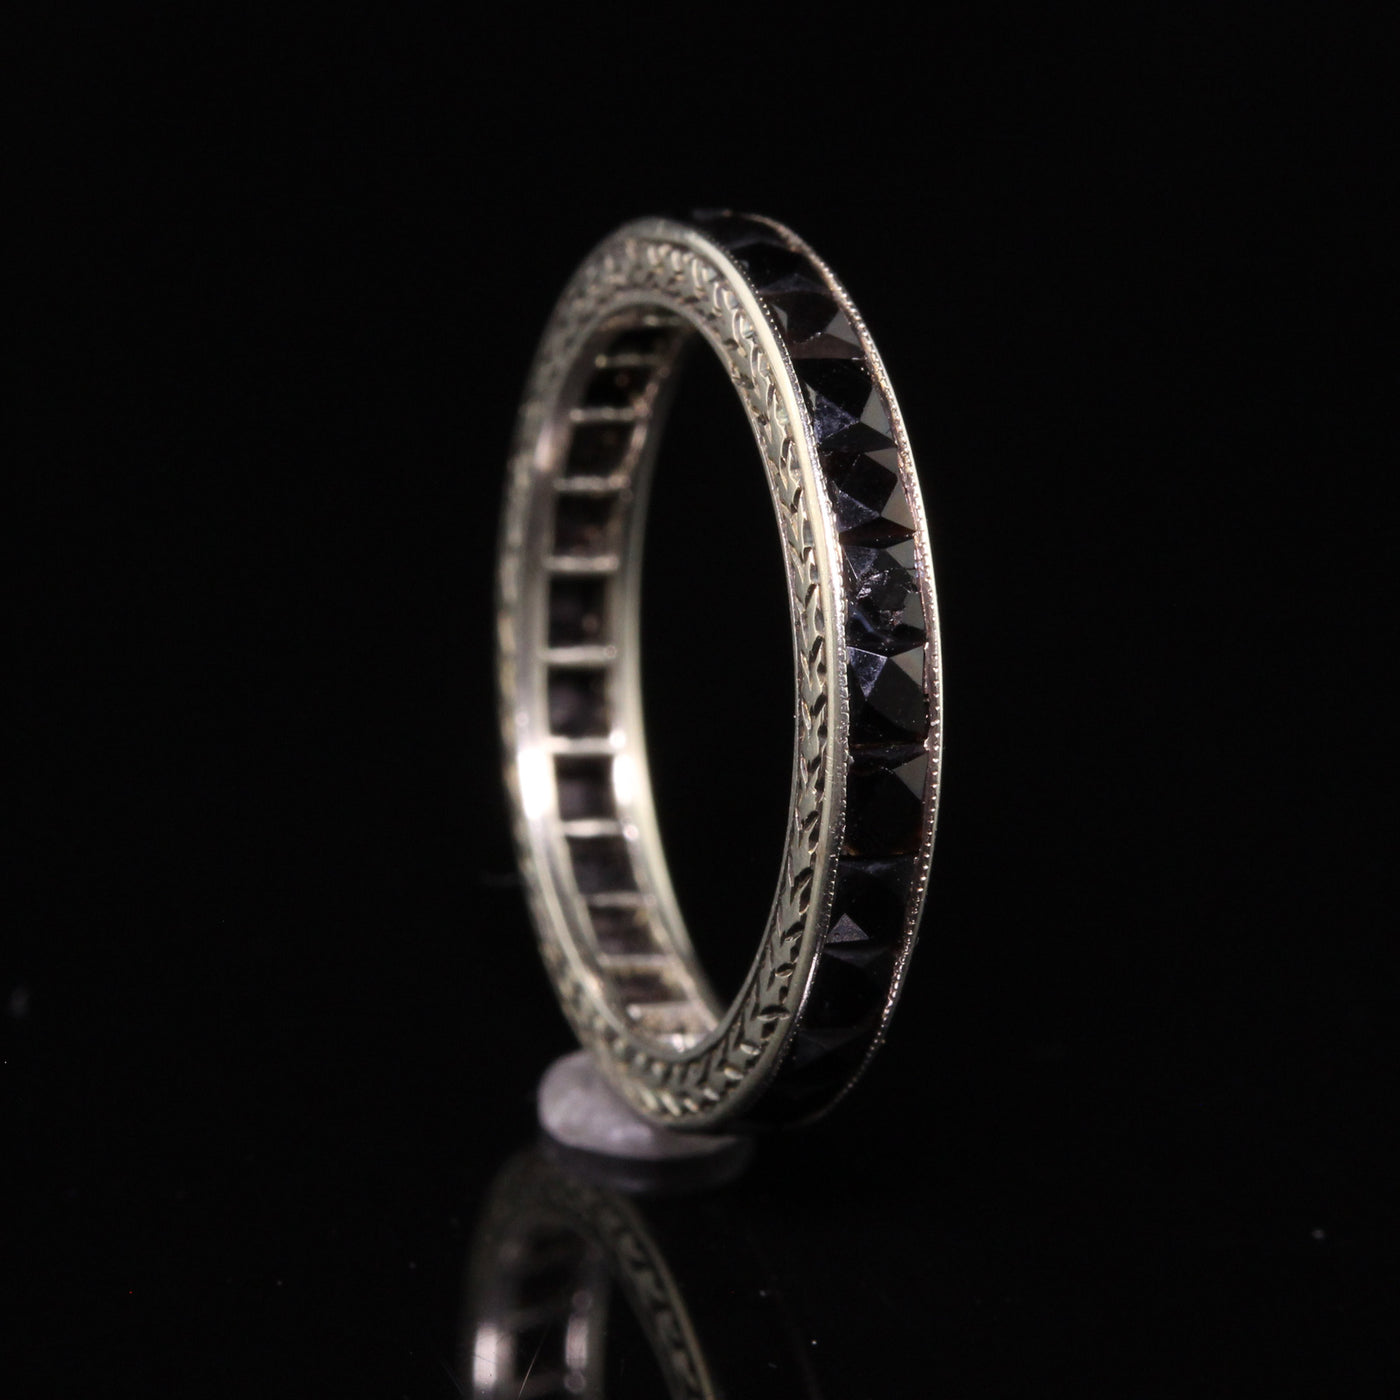 Antique Art Deco 18K White Gold French Cut Onyx Engraved Eternity Band